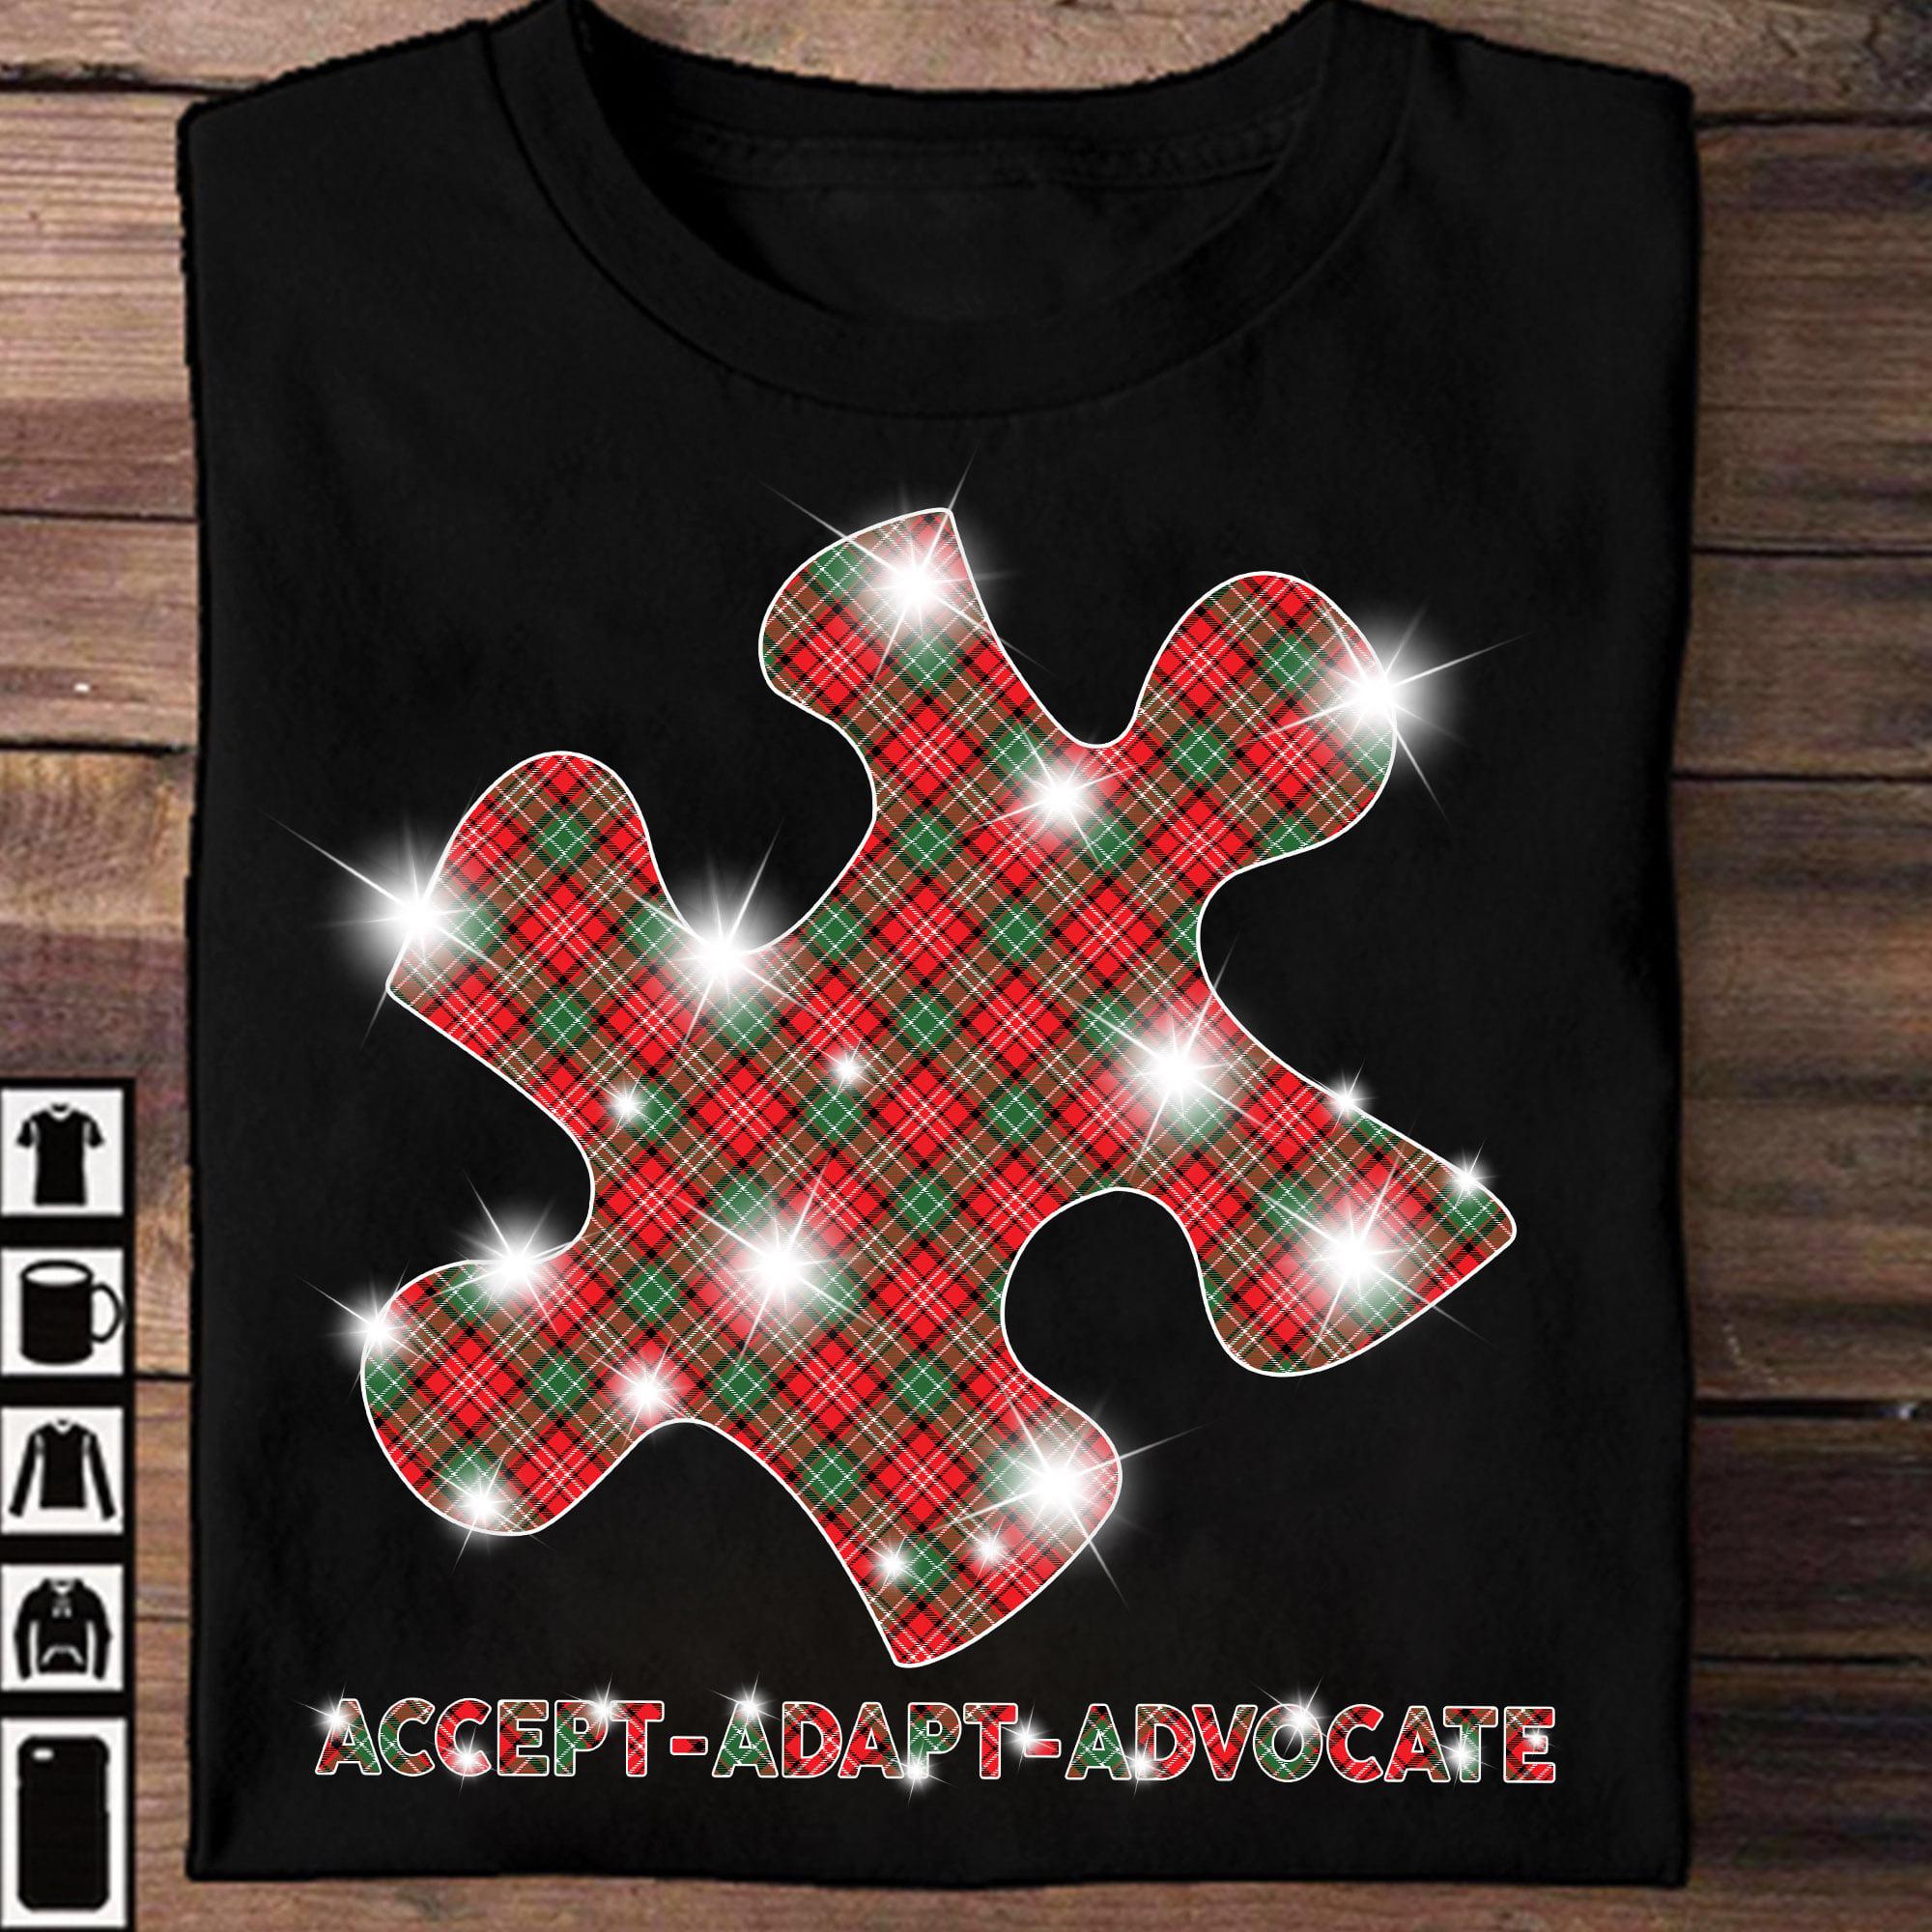 Accept adapt advocate - Autism awareness, gift for autistic people